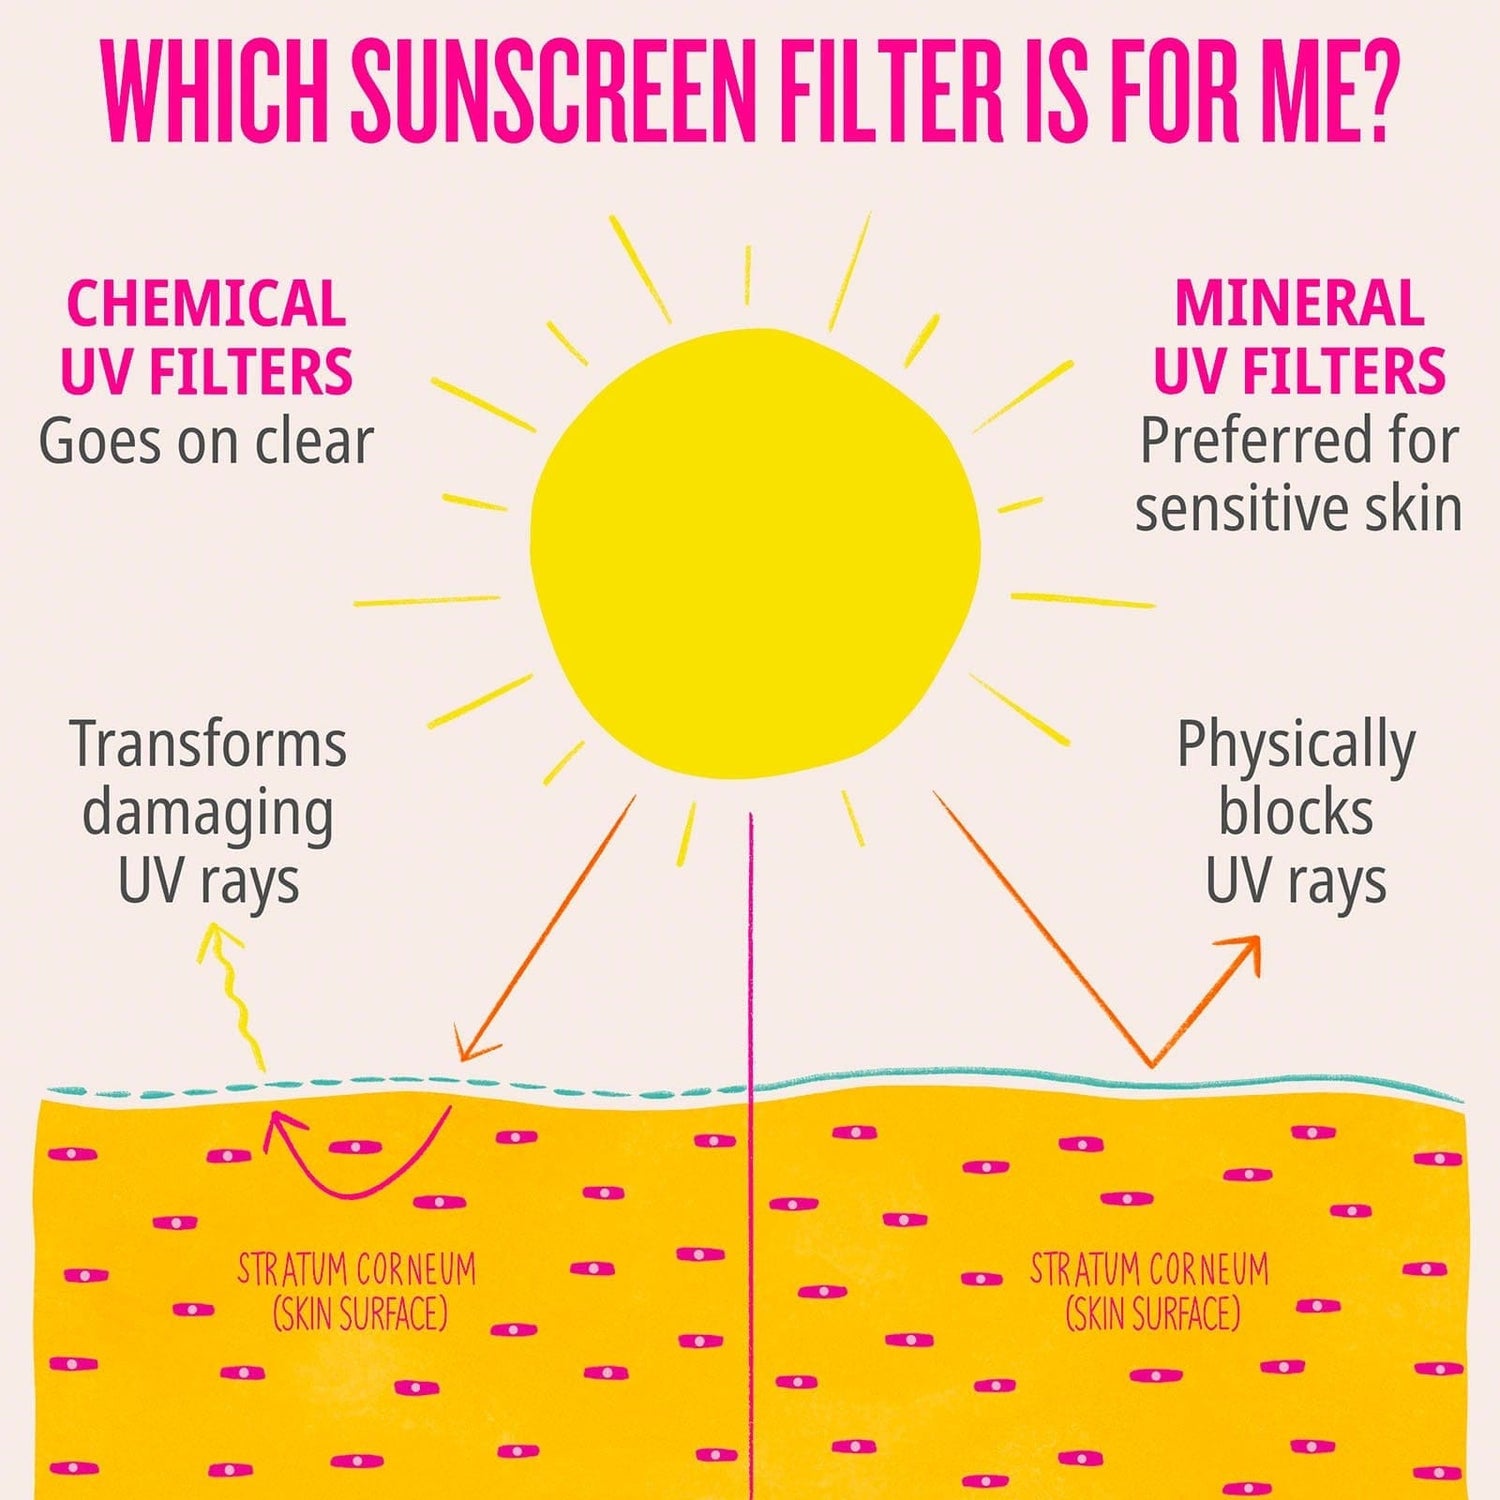 Which sunscreen filter is for me? Chemical UV filters: goes on clear, mineral UV filters: preferred for sensitive skin